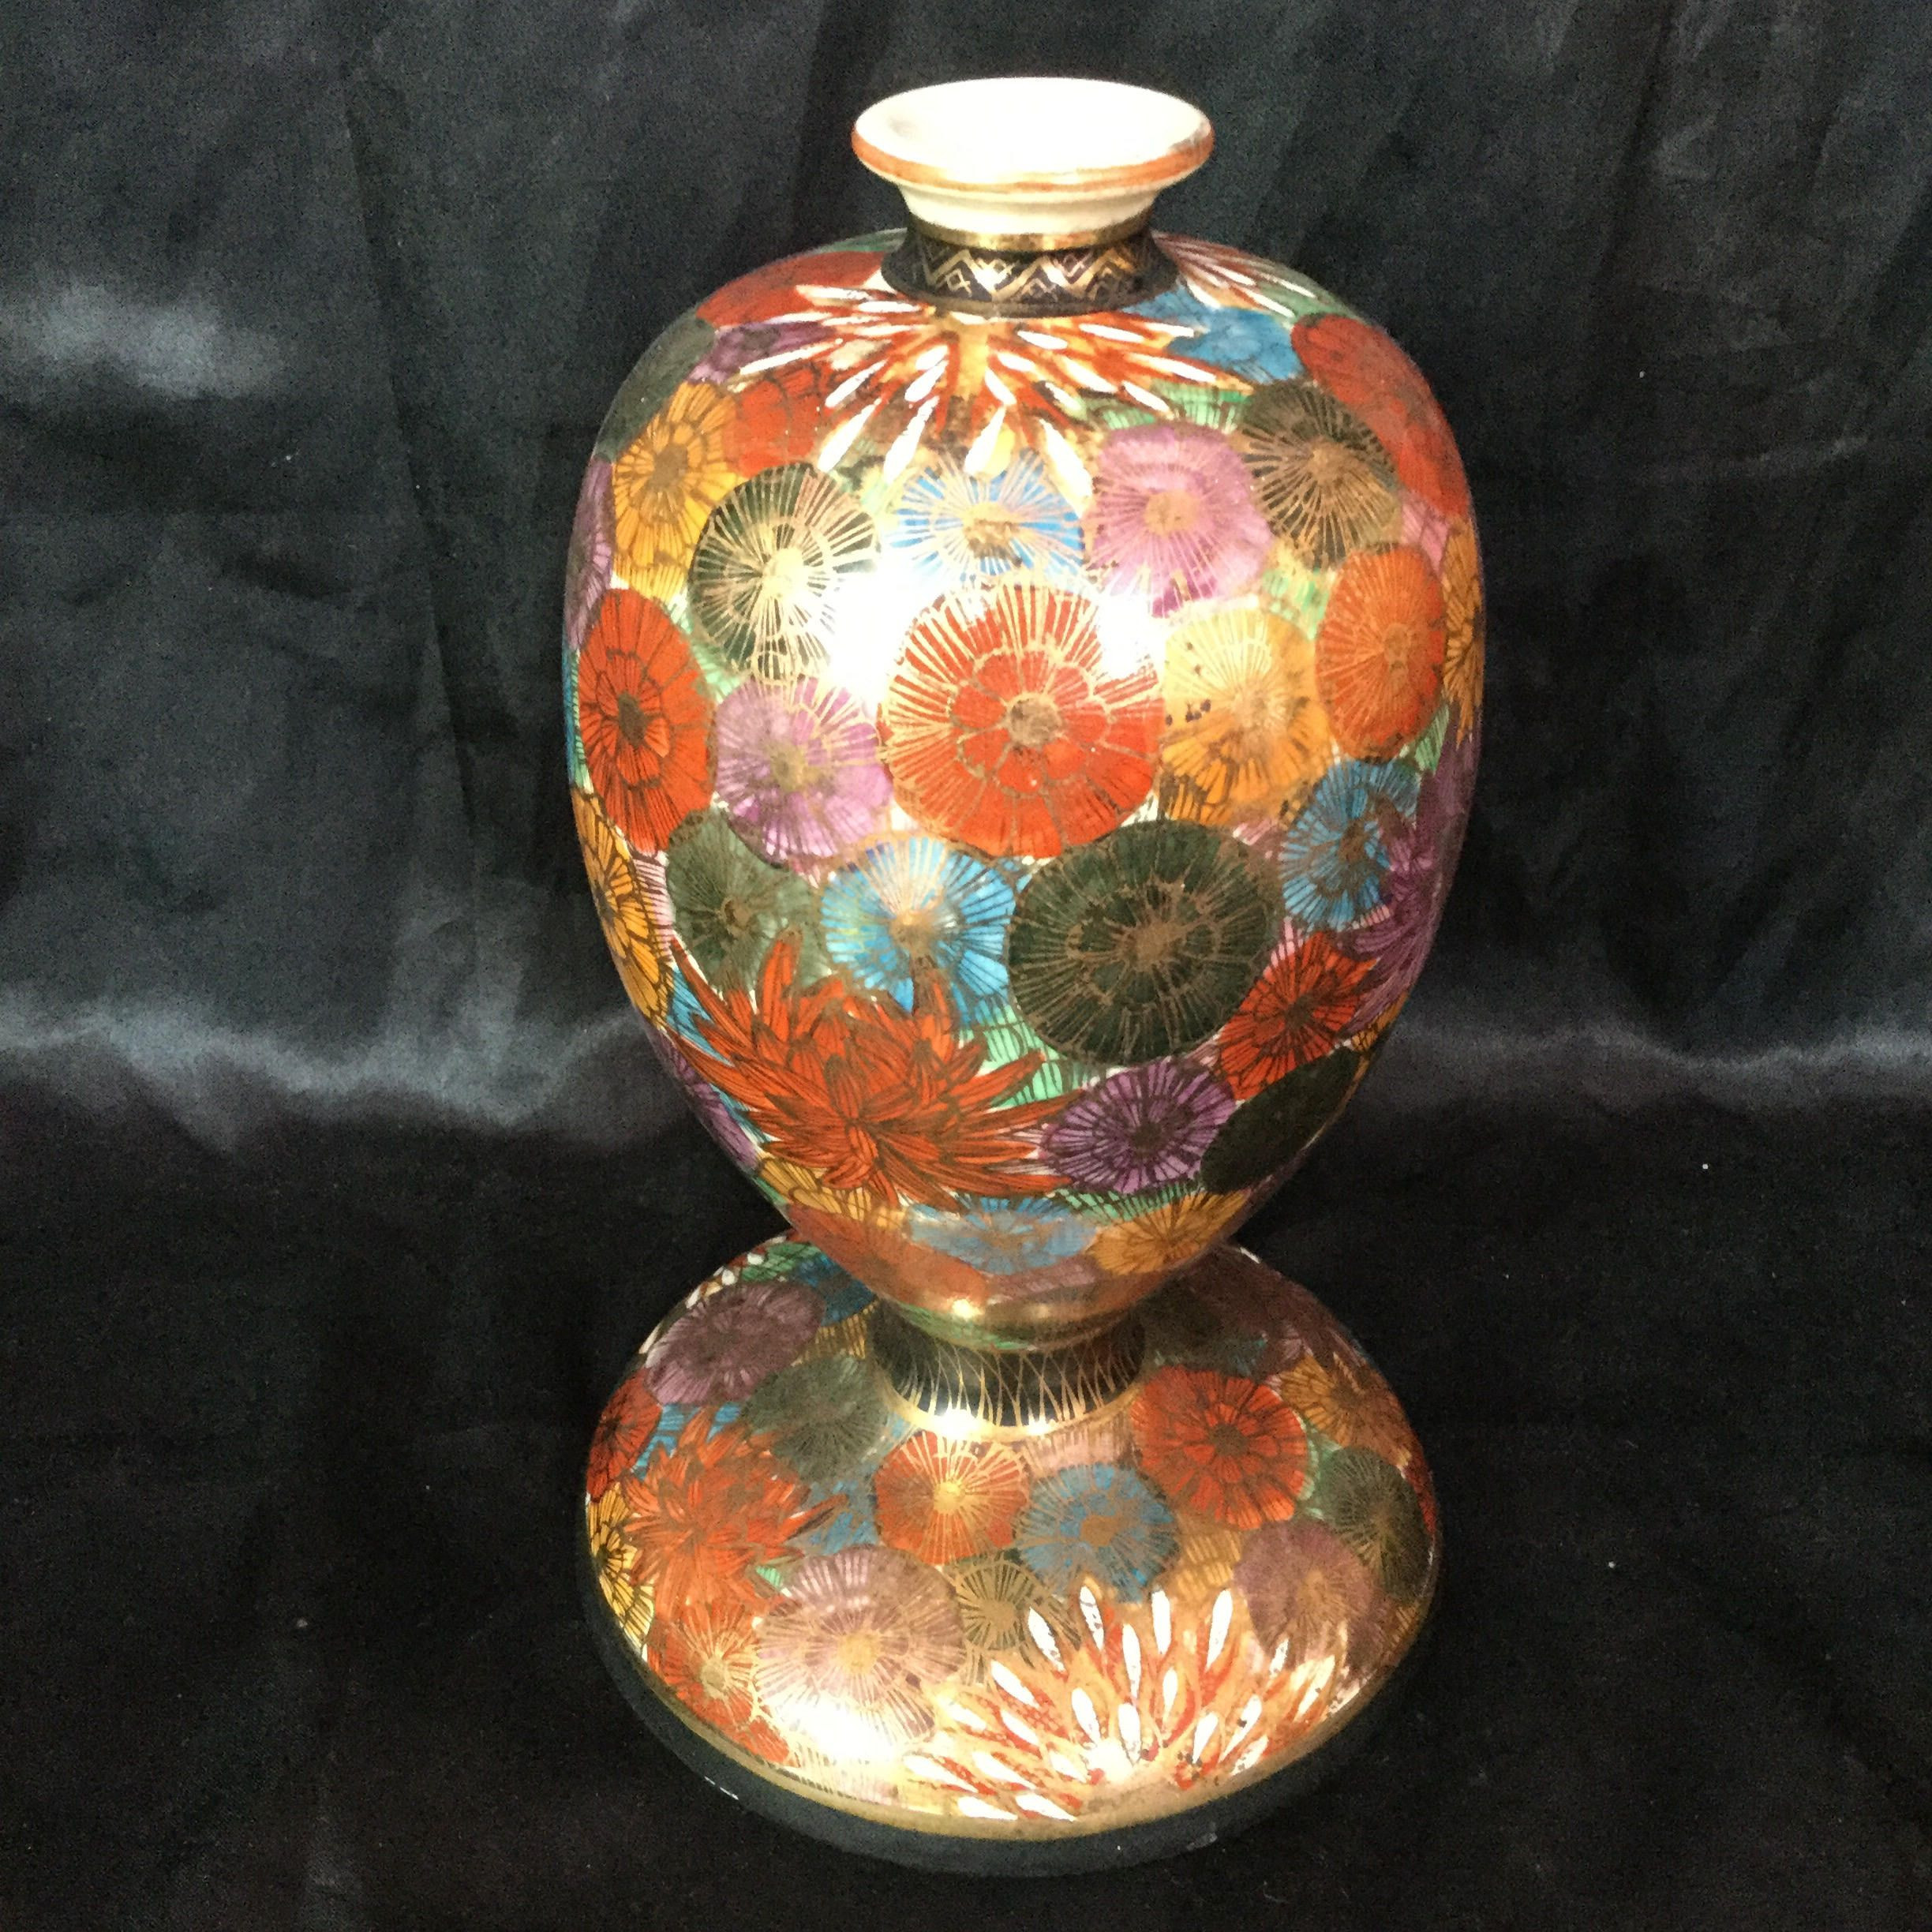 16 Lovely Antique Nippon Vases 2024 free download antique nippon vases of a stunning and colourful japanese vase lamp by uniquepotteryshop intended for a stunning and colourful japanese vase lamp by uniquepotteryshop on etsy